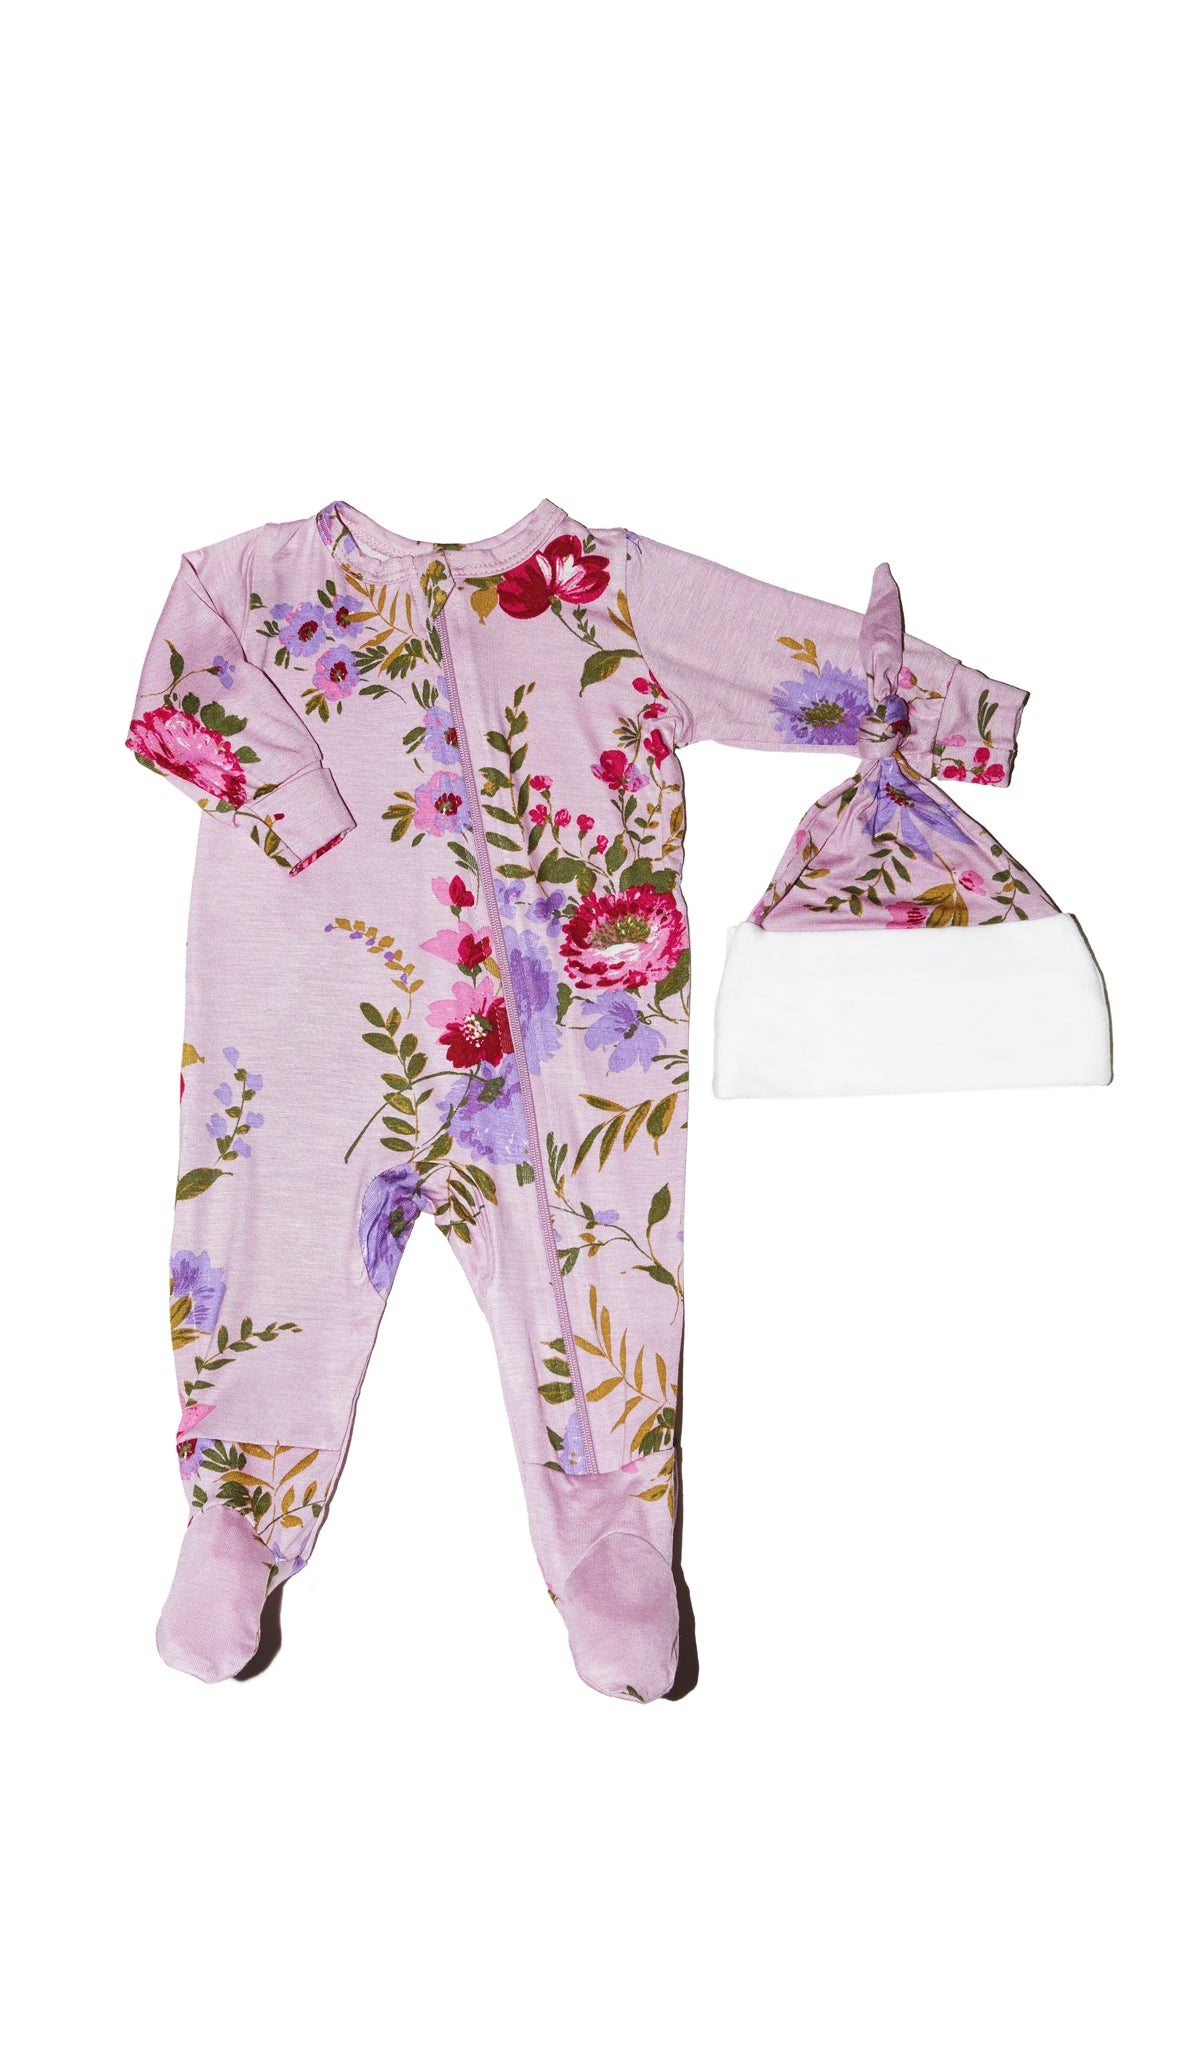 Dusty Rose Footie 2-Piece with long sleeves, zip front and matching knotted baby hat.